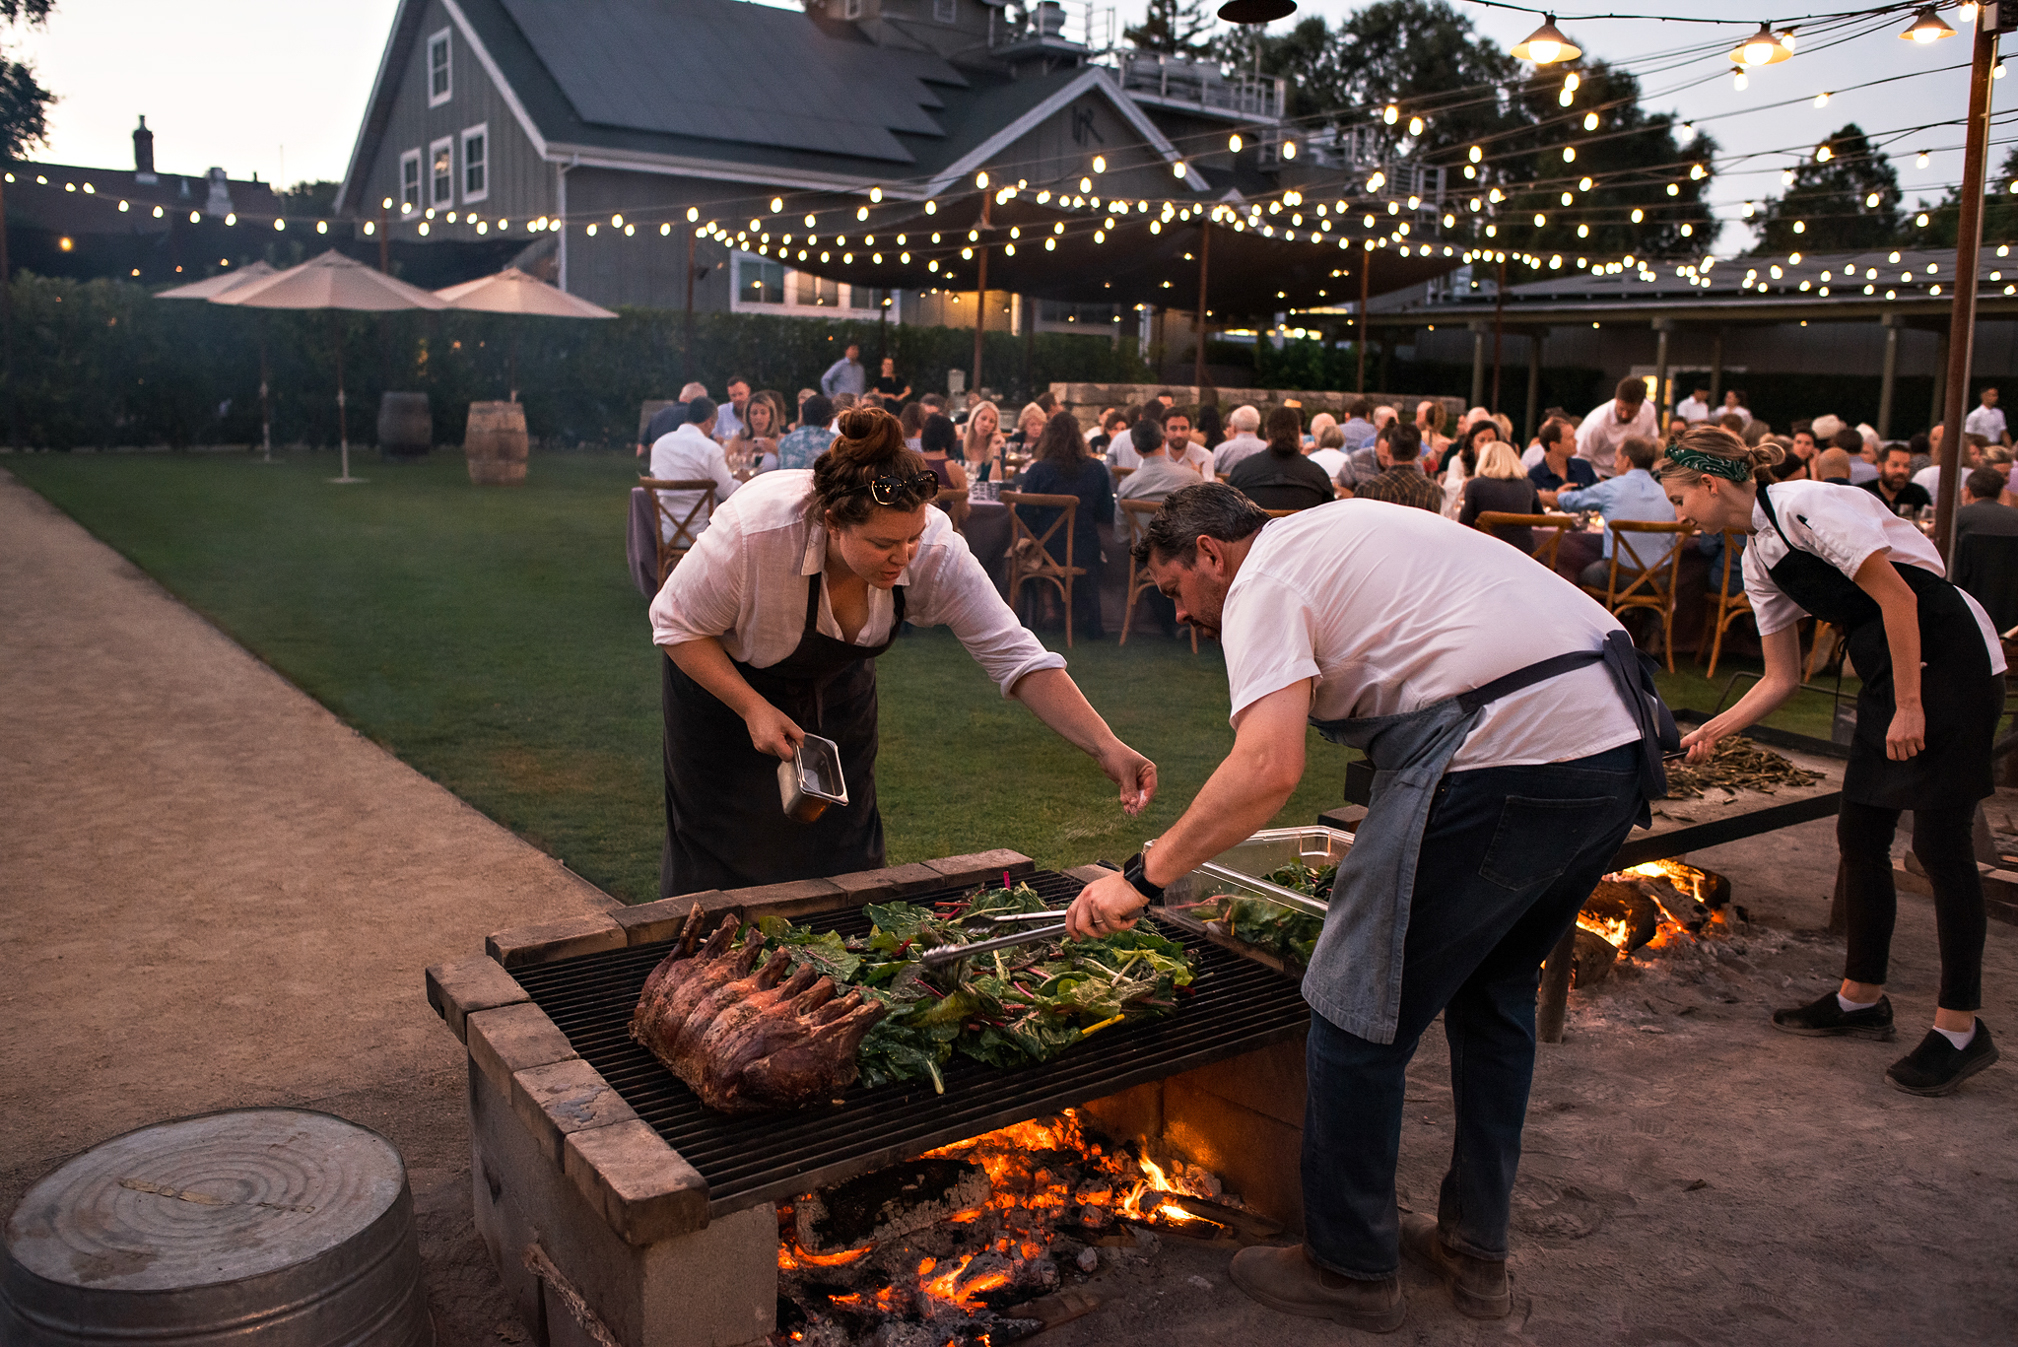 Cooking food at the Farmstead Live Fire event